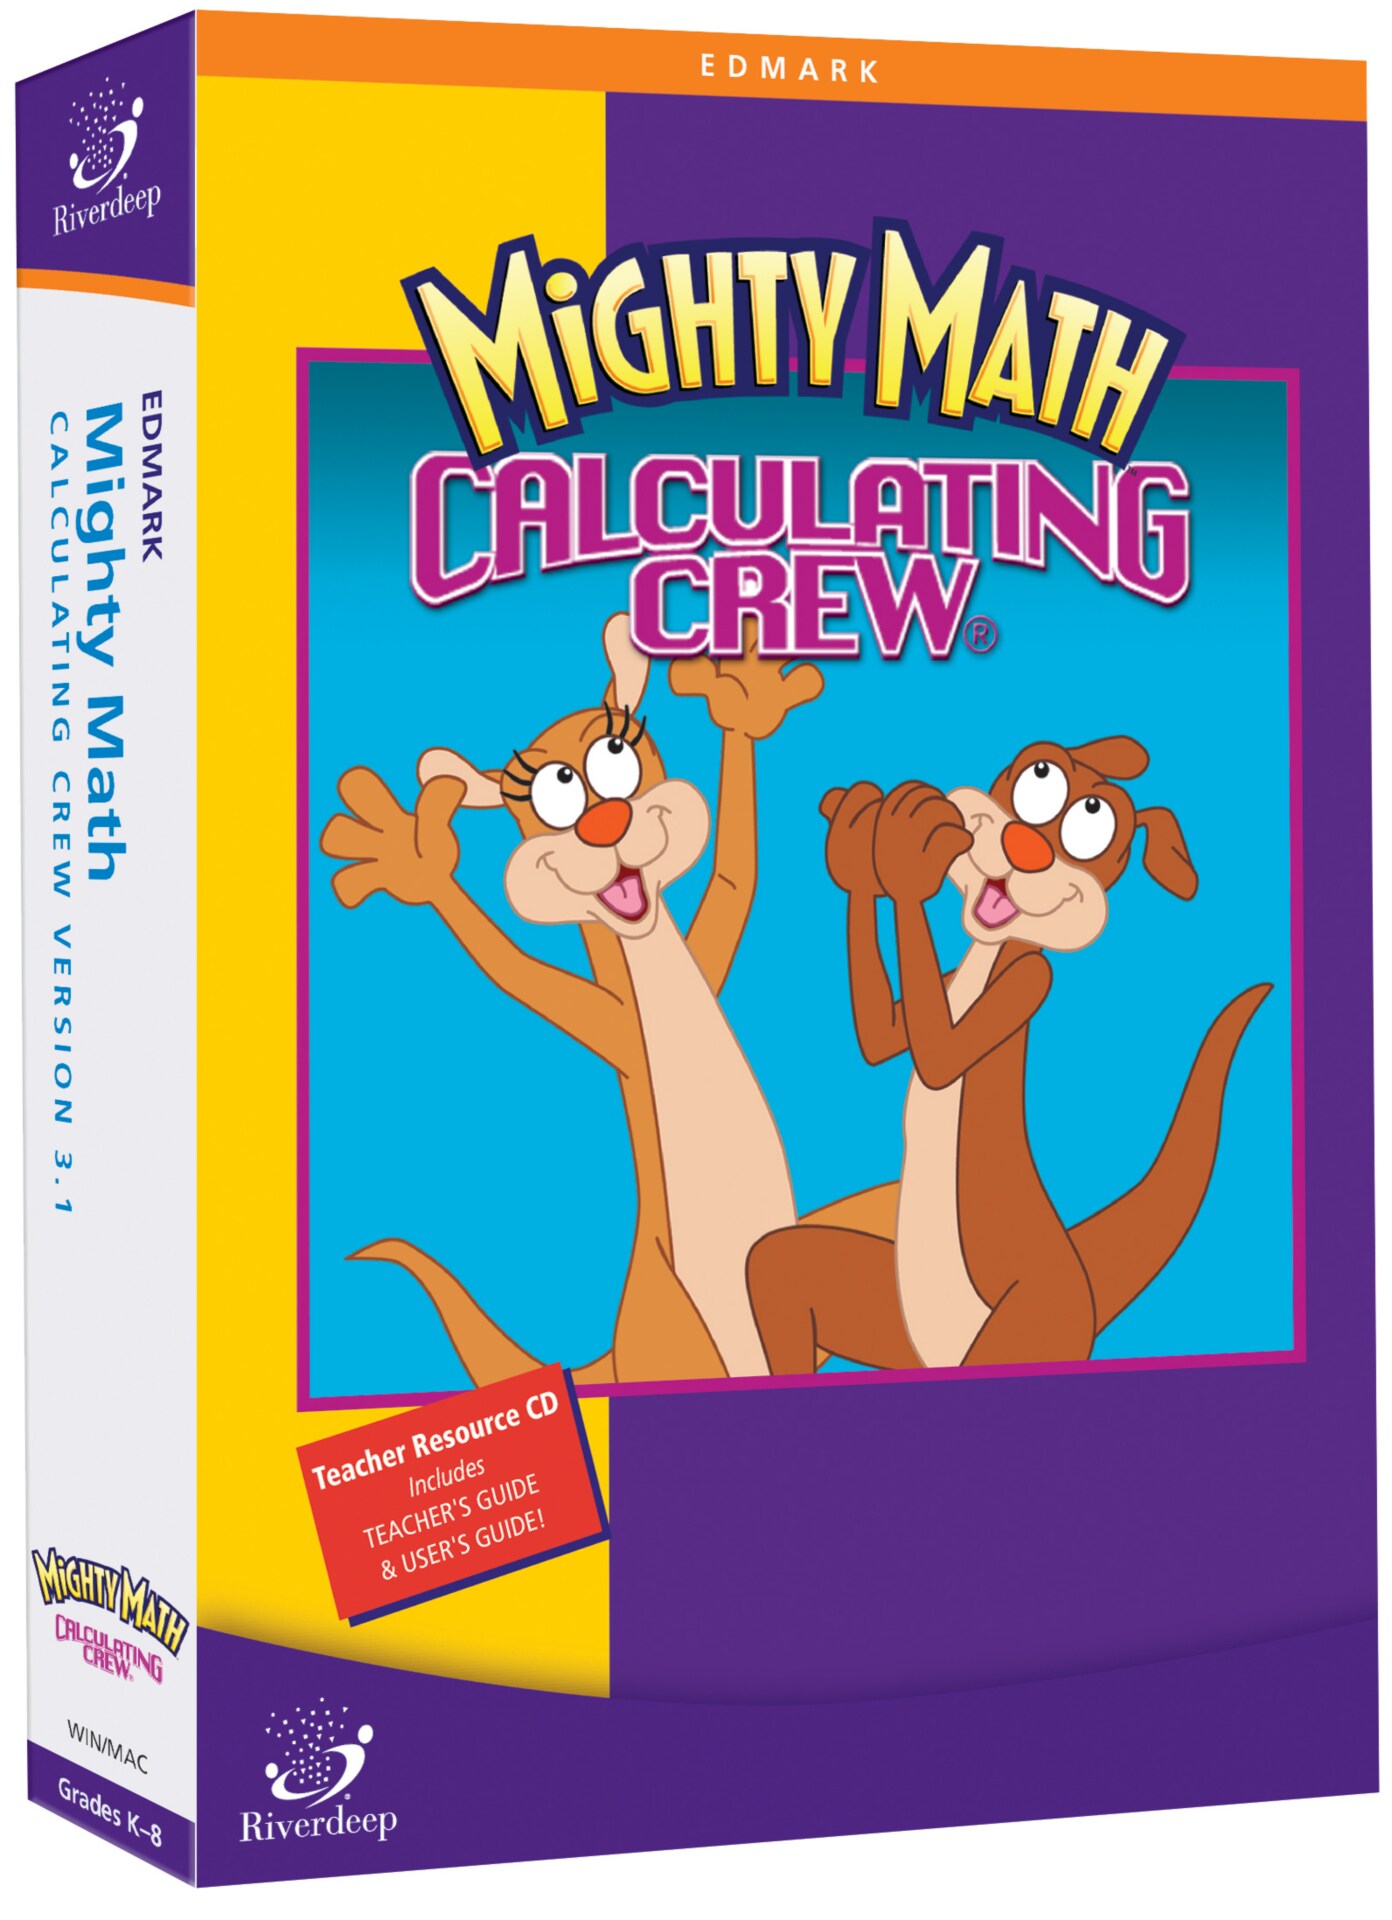 Mighty Math Calculating Crew School Edition (v. 3.1) - box pack - 2 users